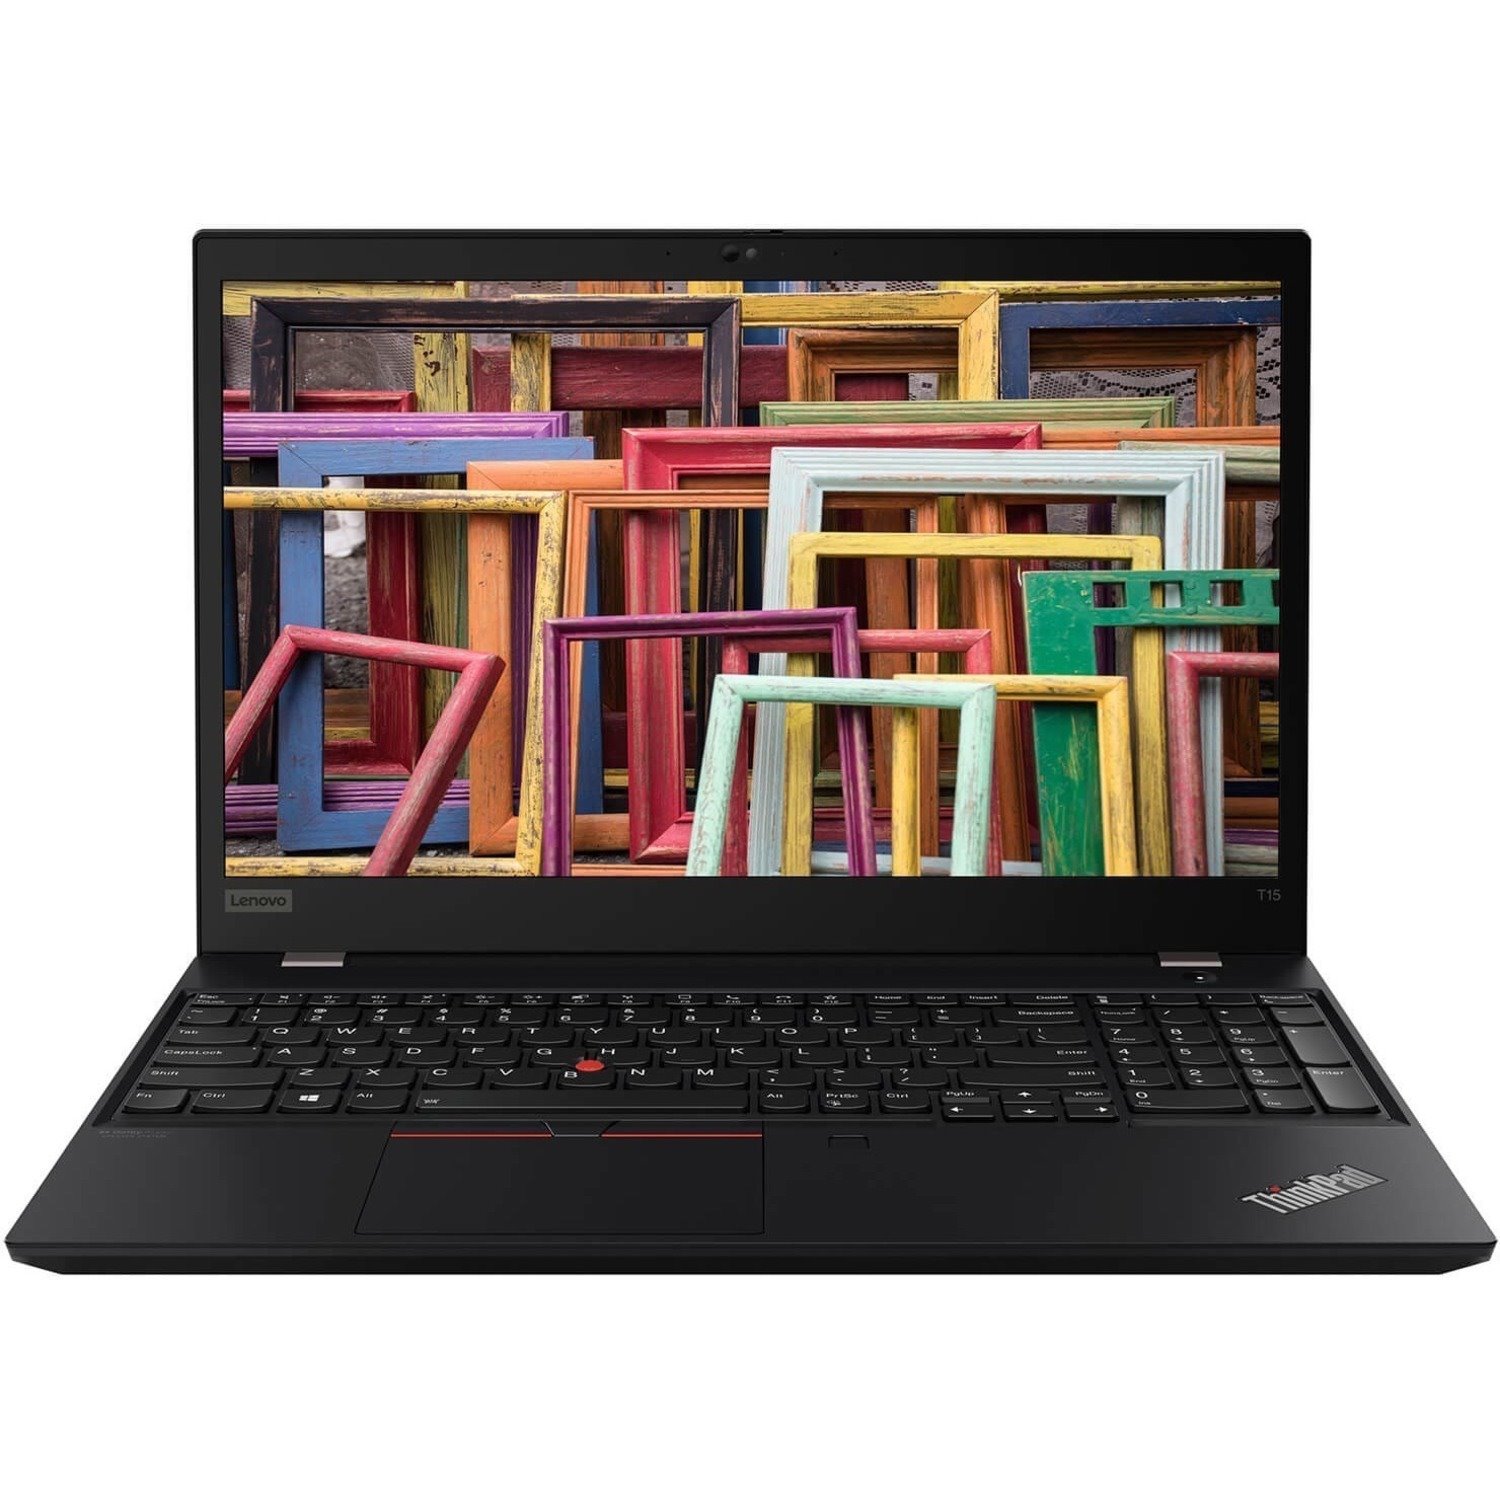 Lenovo ThinkPad T15 Gen 2 20W400LJUS 15.6" Notebook - Full HD - 1920 x 1080 - Intel Core i5 11th Gen i5-1135G7 Quad-core (4 Core) 2.4GHz - 8GB Total RAM - 256GB SSD - Black - no ethernet port - not compatible with mechanical docking stations, only supports cable docking